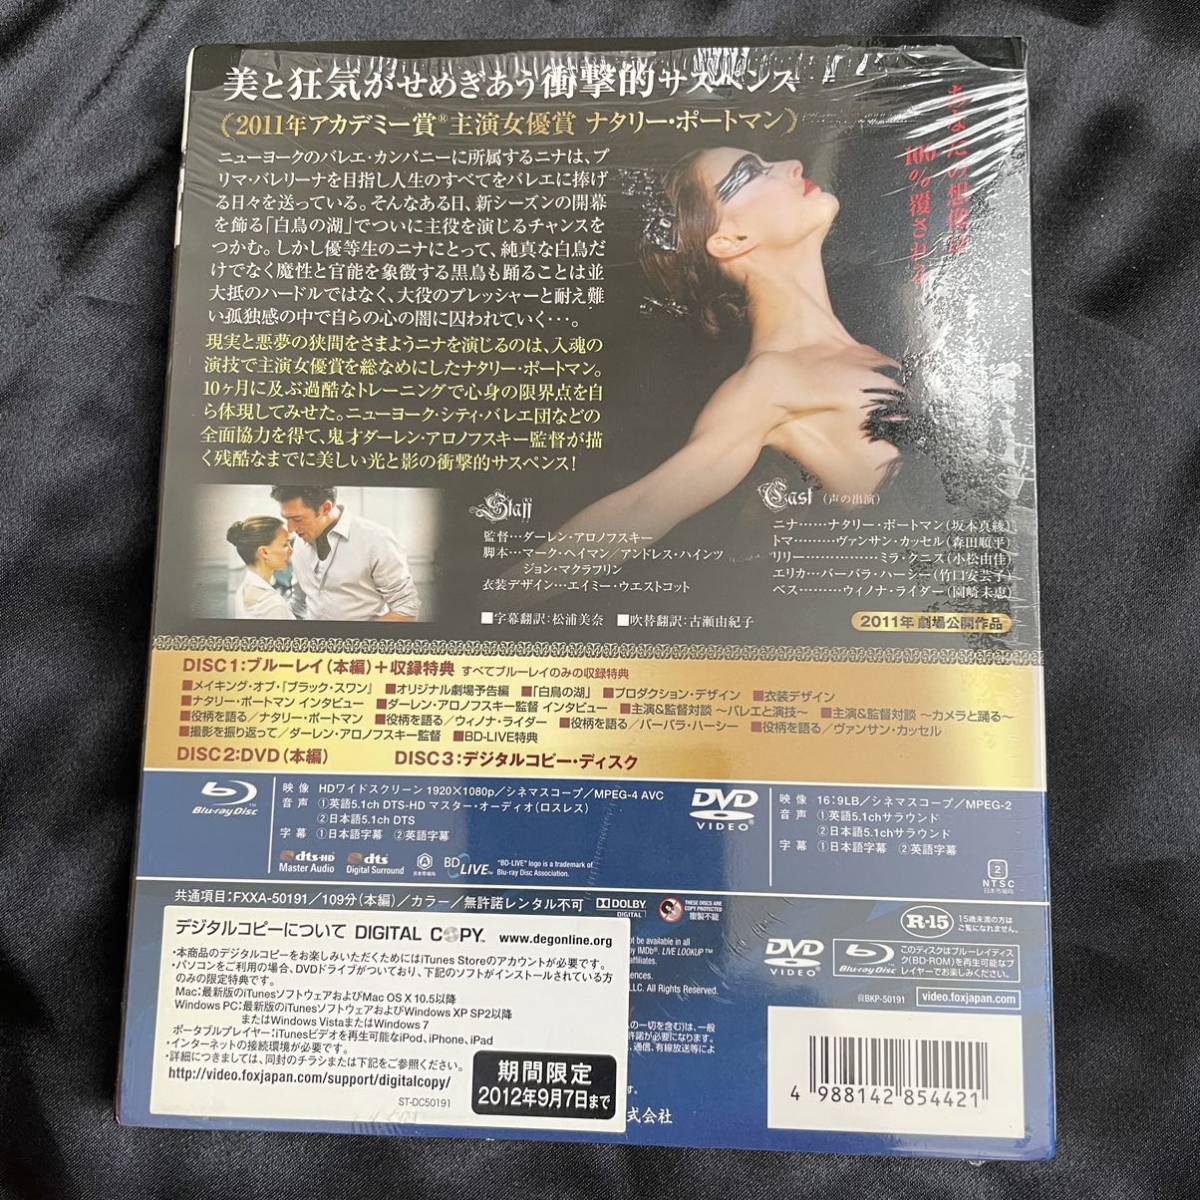 [ black s one ]Blu-ray the first times limitation Blue-ray DVD 3 sheets set nata Lee port man red temi-.2011 year suspense blow change 